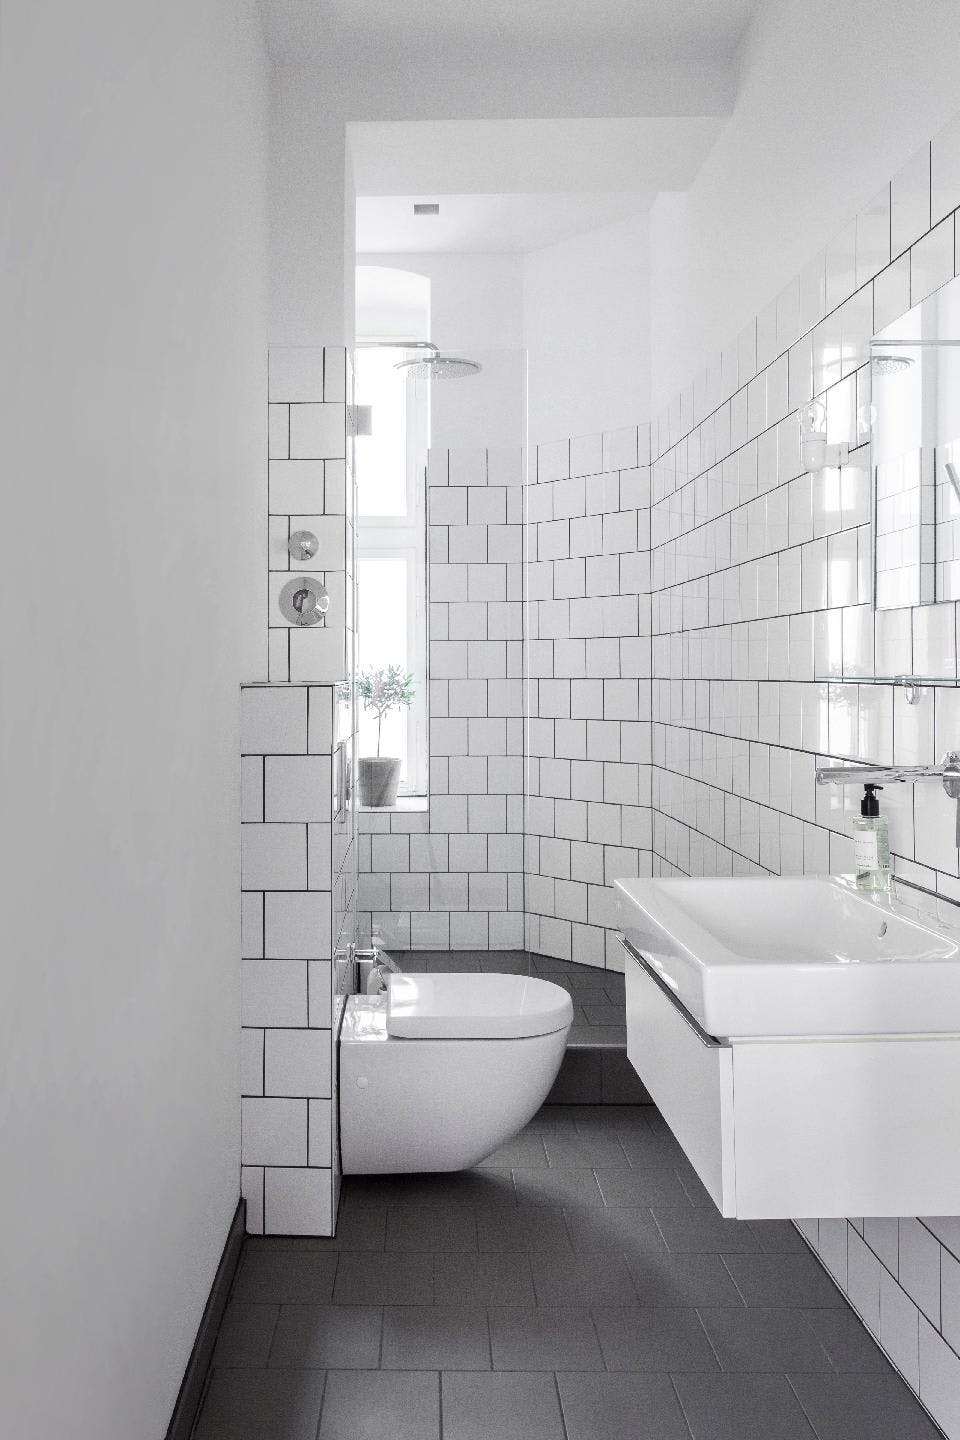 The image features a modern bathroom with a white sink, toilet, and bathtub.